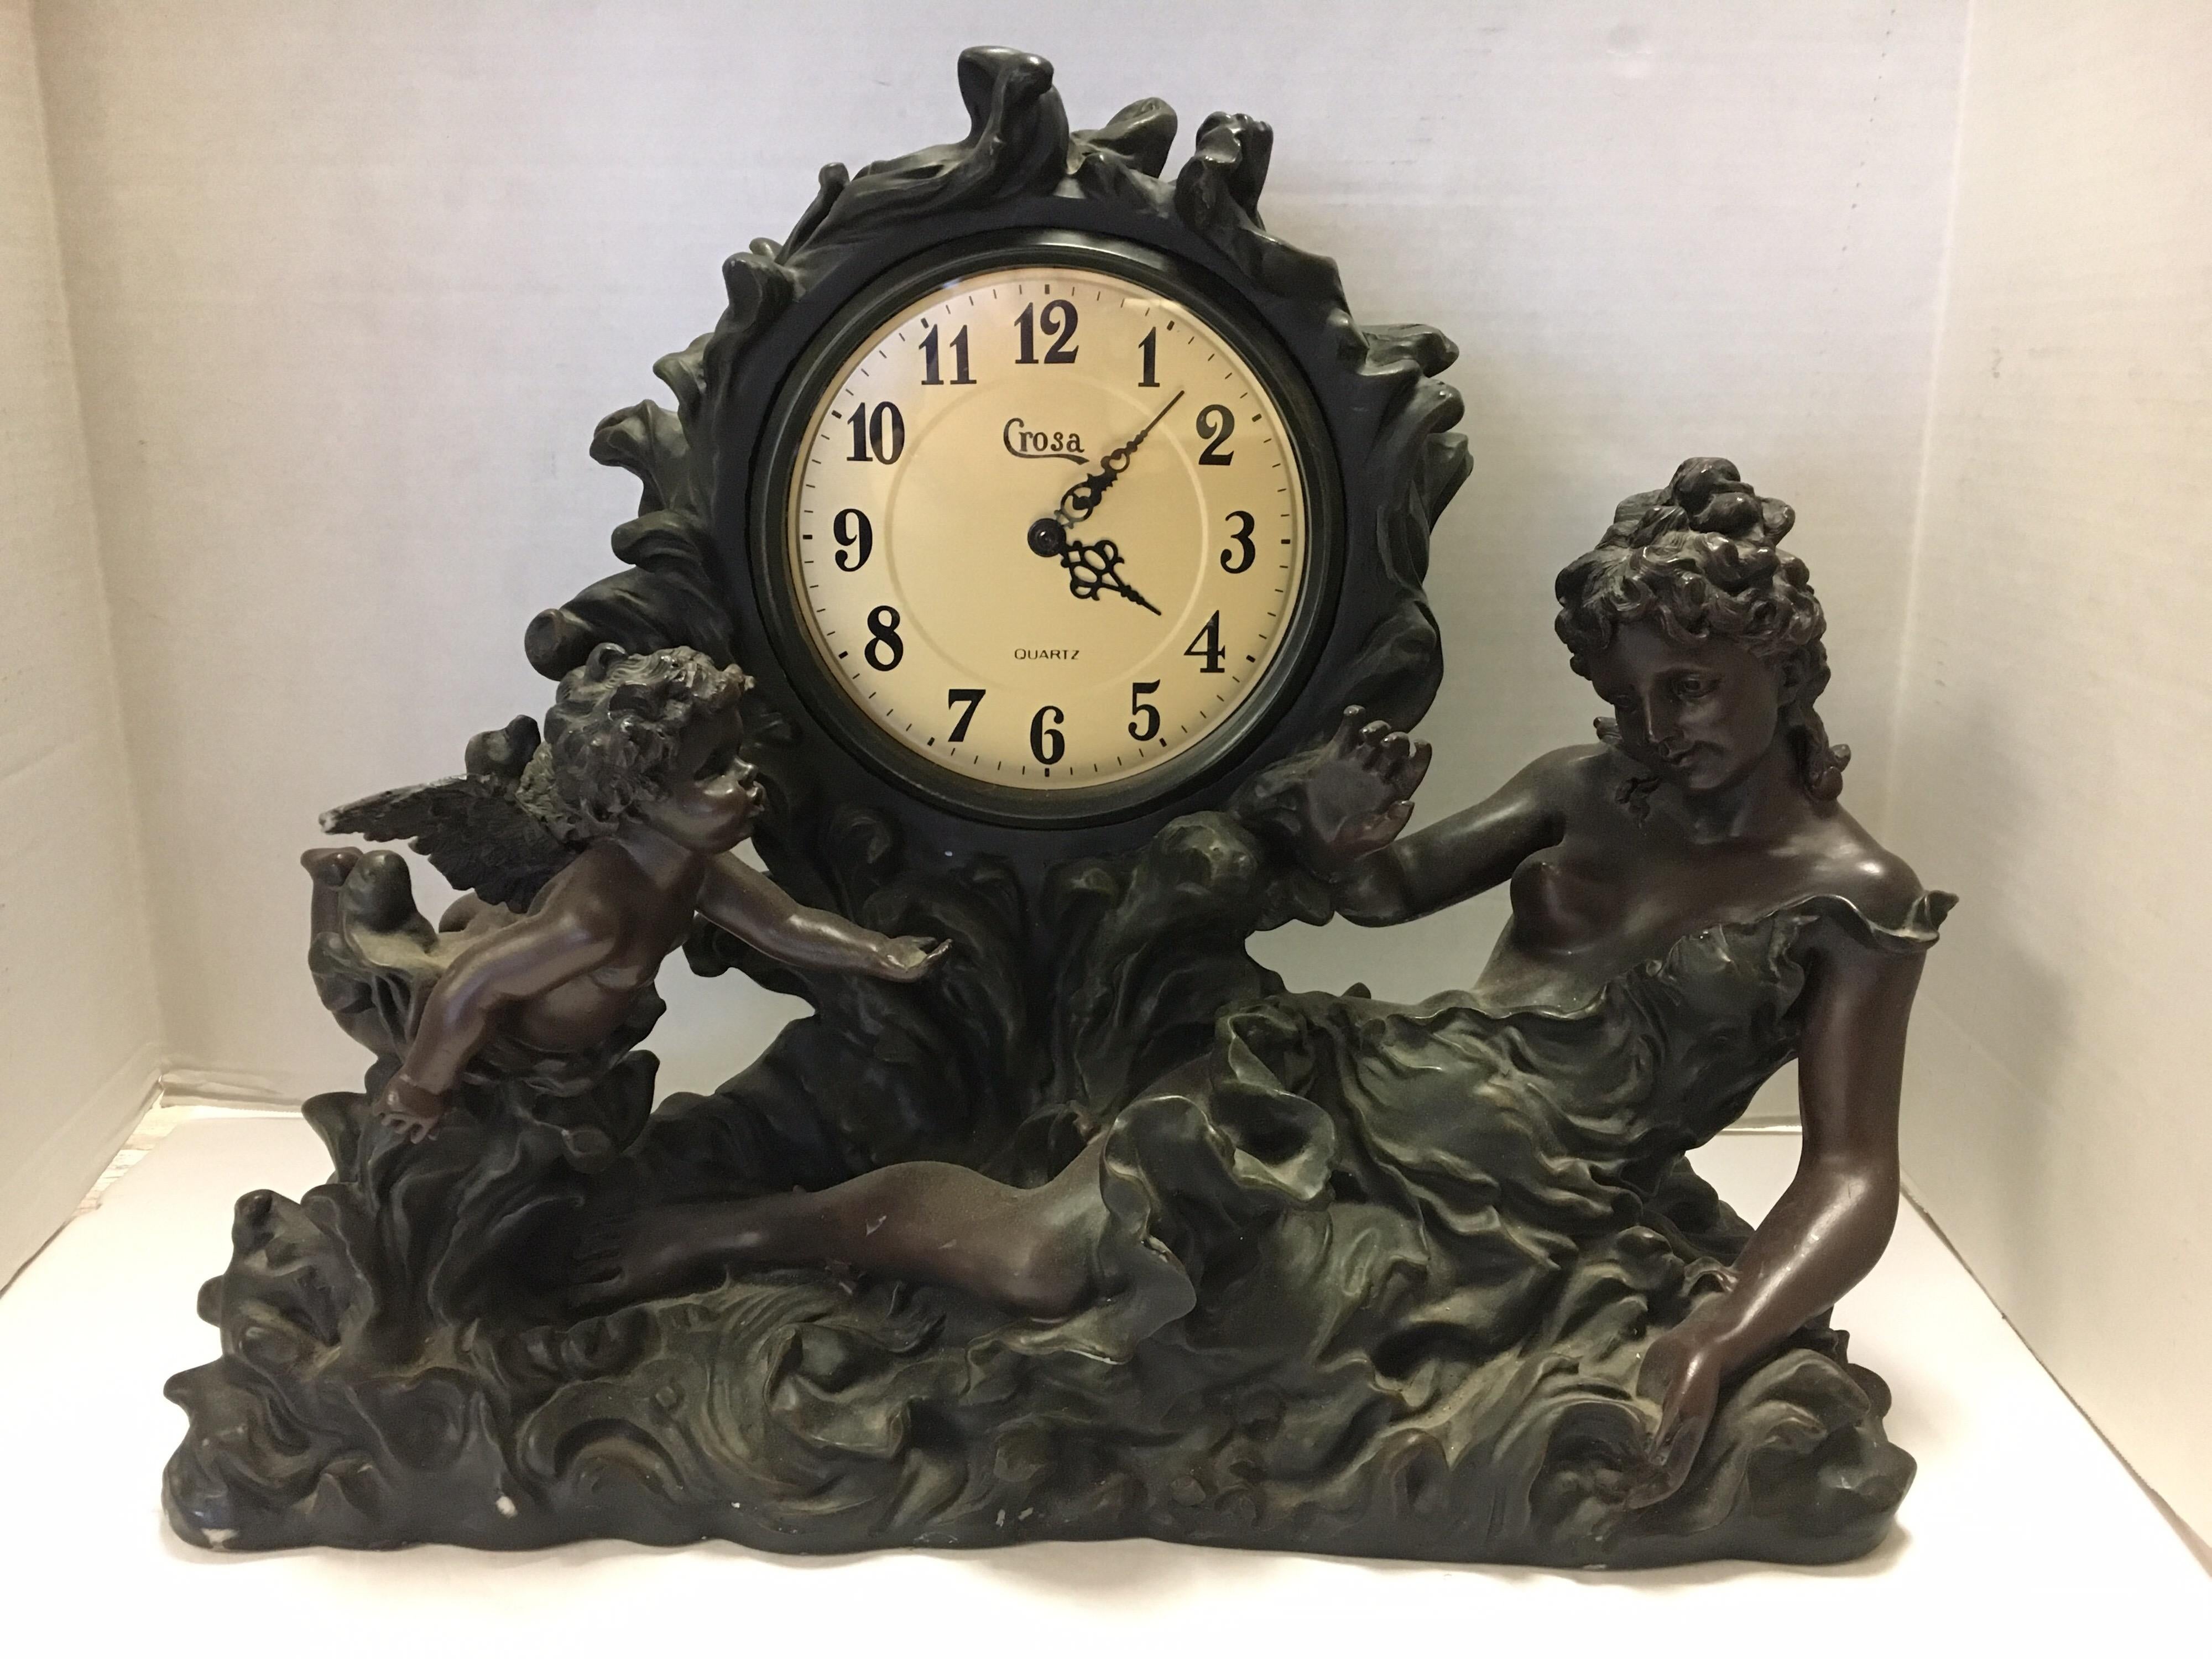 Mid-late 20th century Rococo style intricately carved decorative mantel clock.
Depicts woman and cherub angel on each side of carved clock casing. Clock is battery operated
as this piece is from the mid to late twentieth century. The color is very